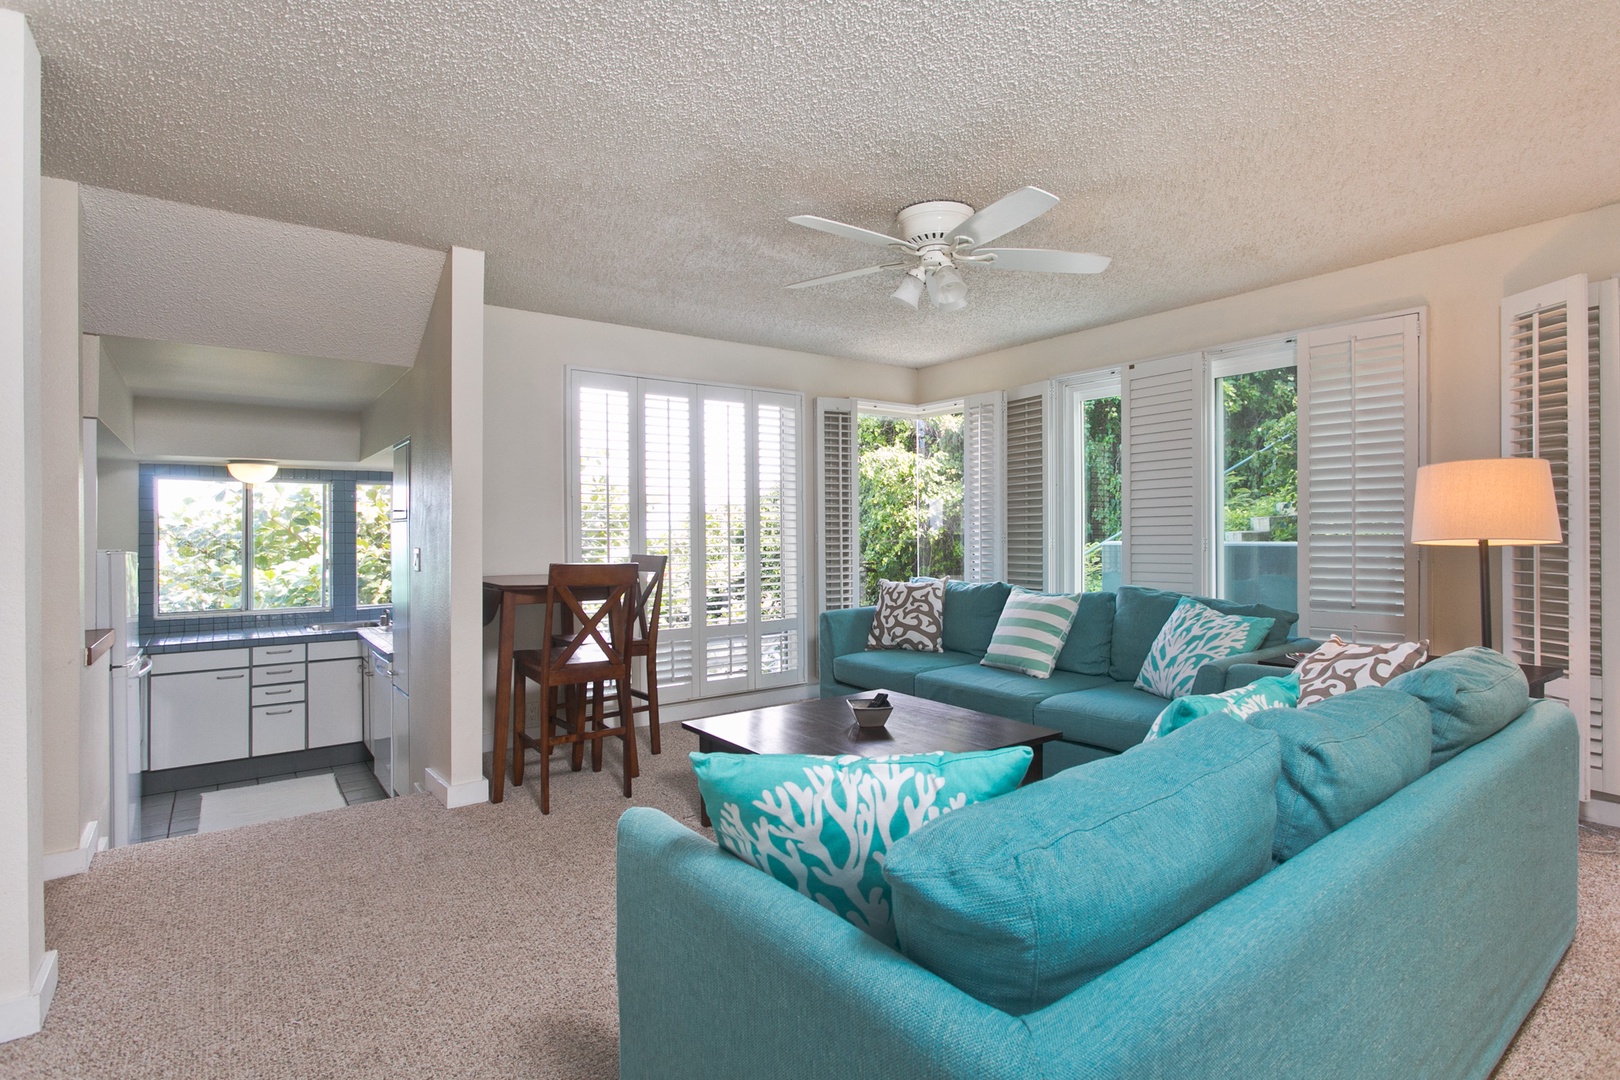 Kailua Vacation Rentals, Hale Kolea* - The dinette right off the lounge area and mini kitchen.